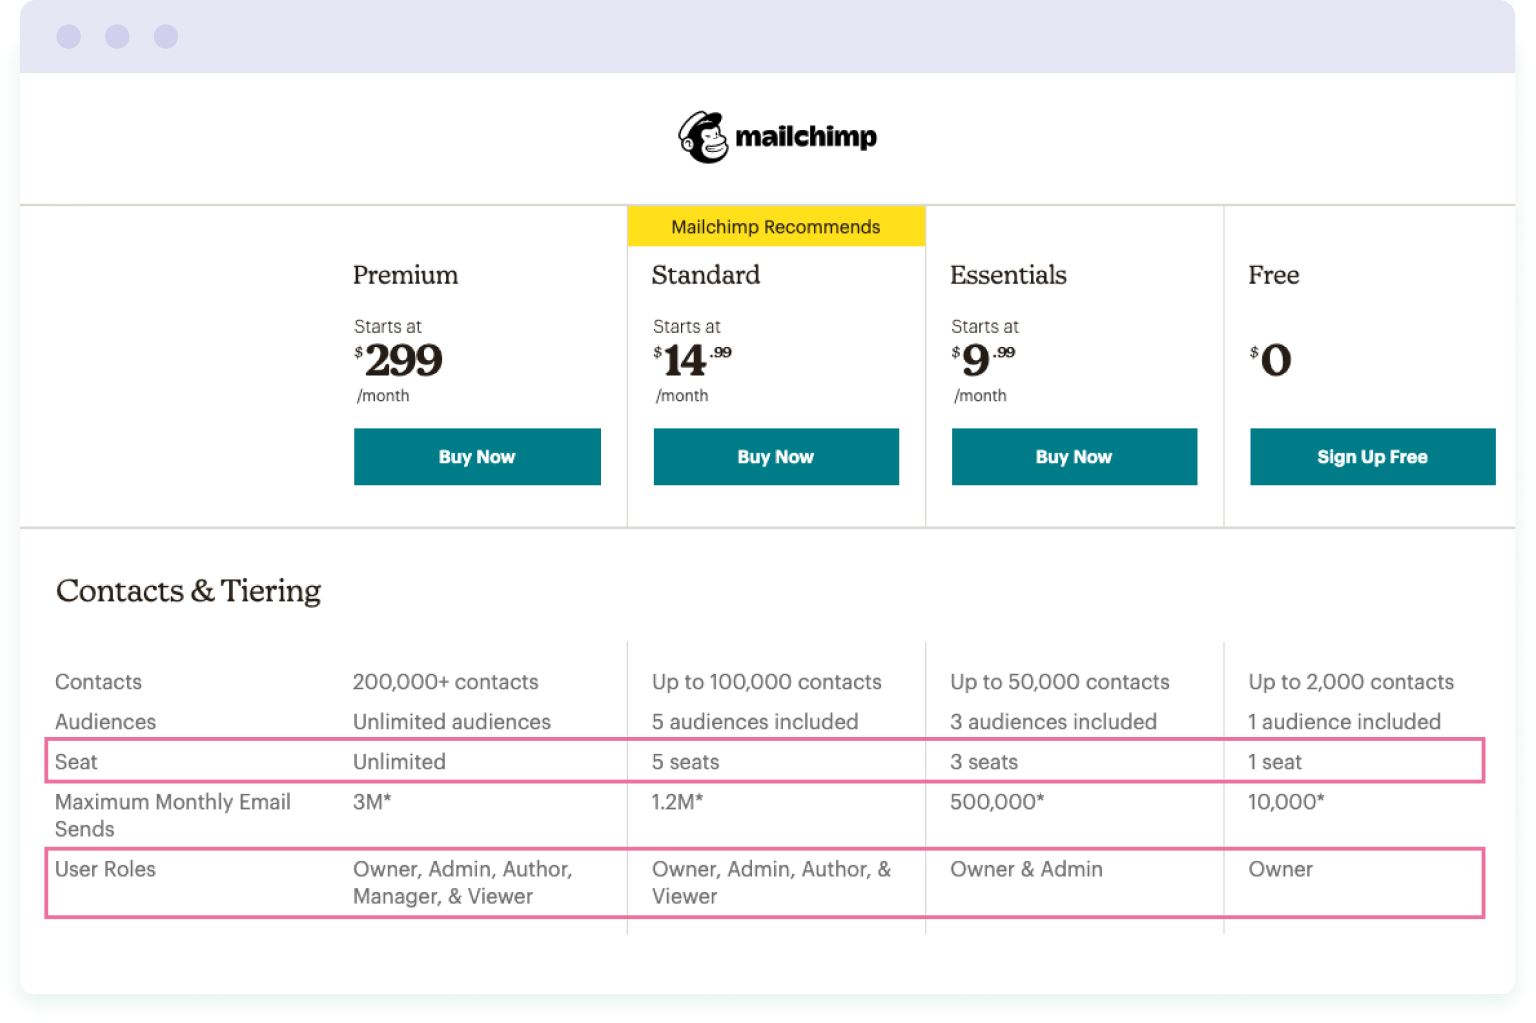 Screenshot of Mailchimp's pricing page showing number of seats and available user roles on their paid plans